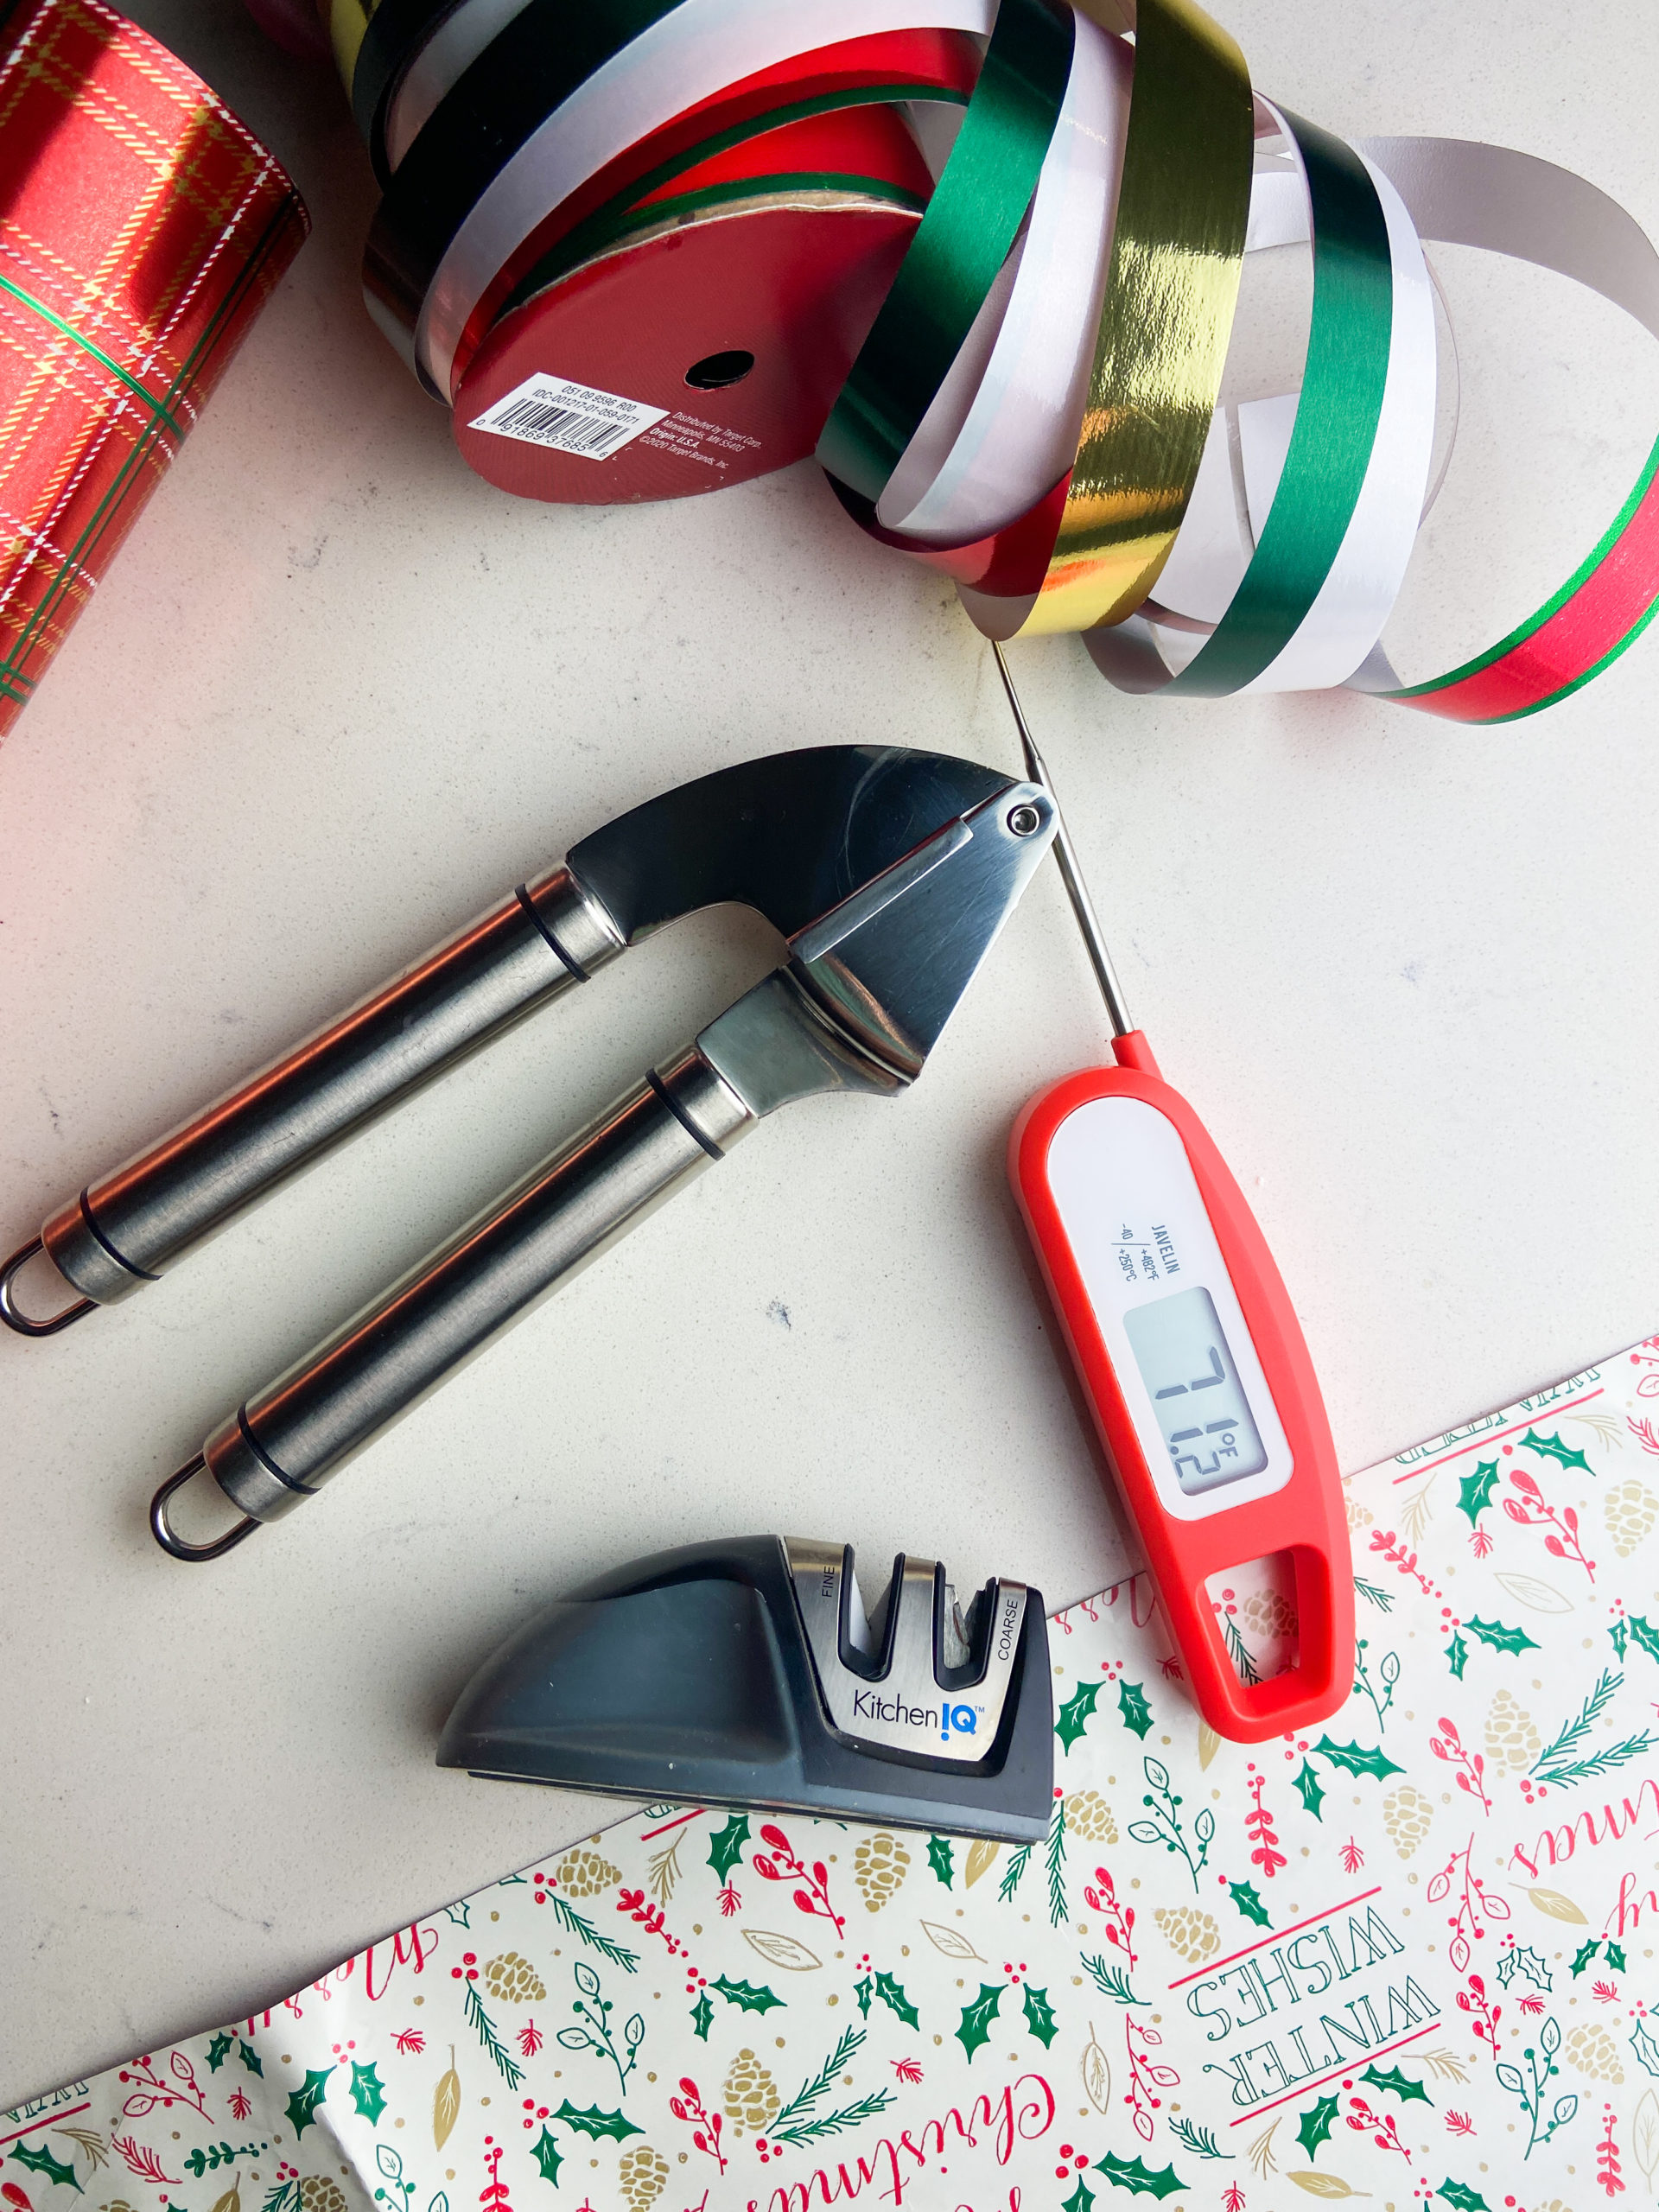 Garlic press, knife sharpener and digital meat thermometer. 